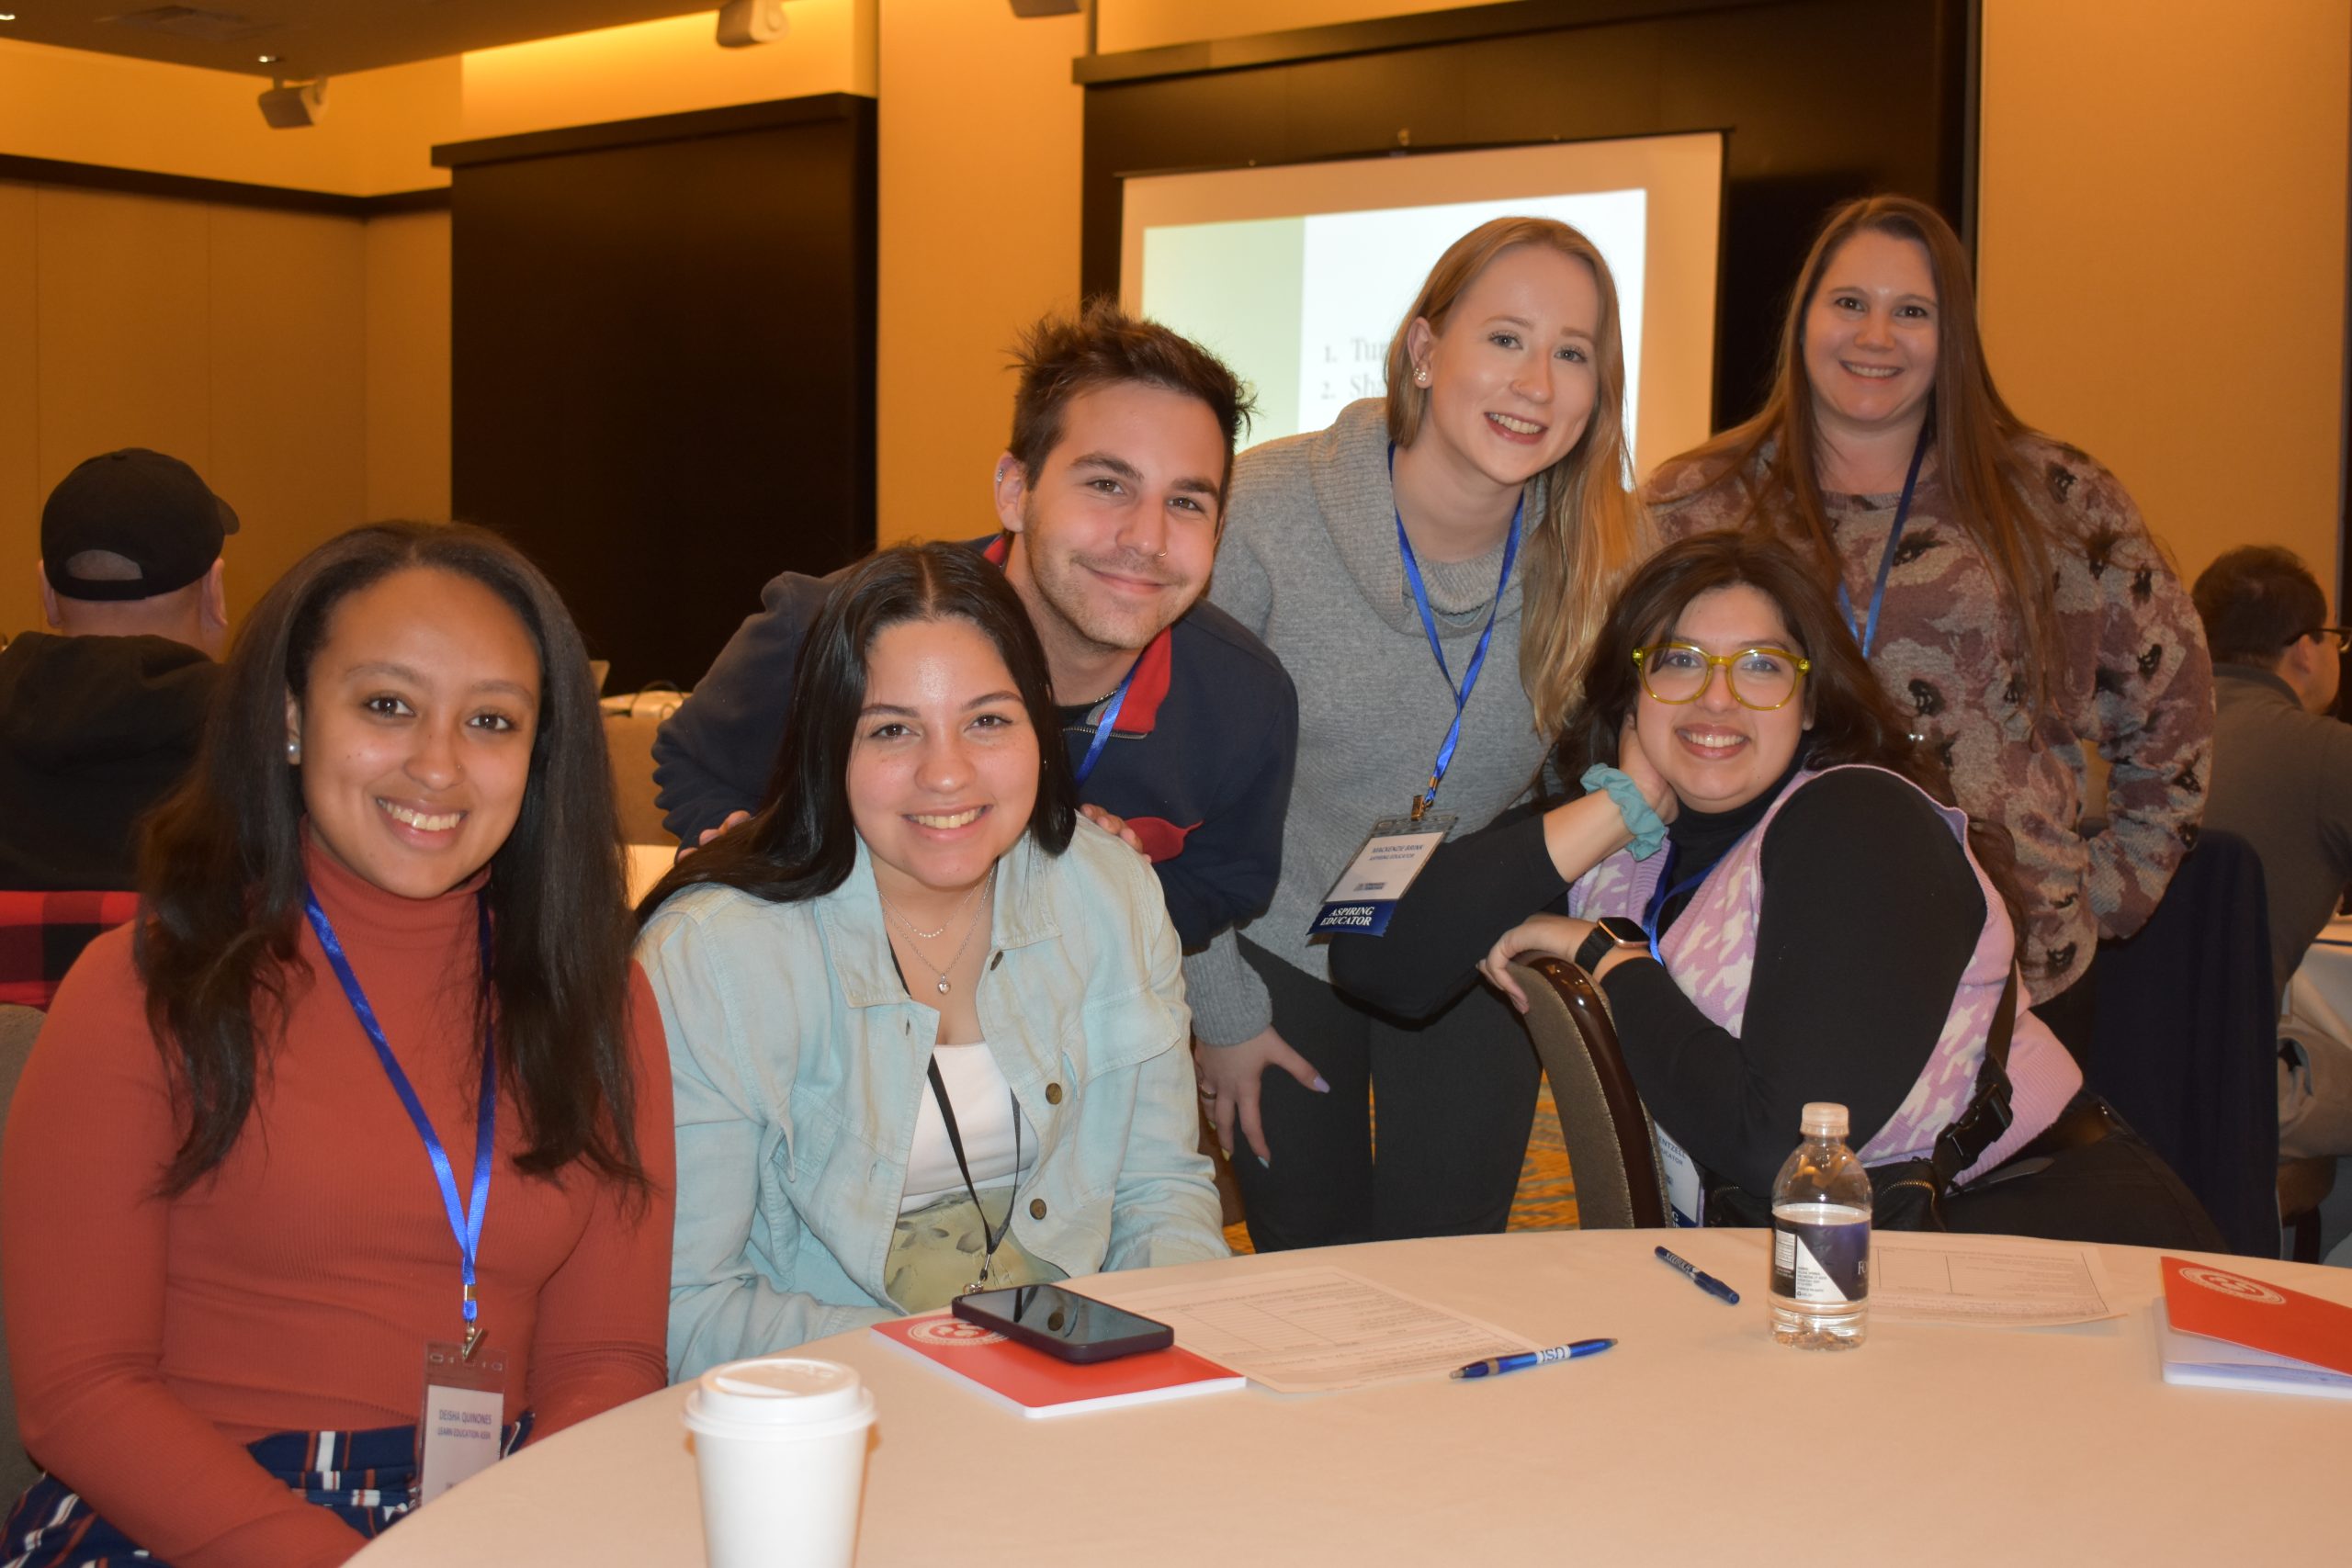 A group of new and aspiring educators attending CEA's Early Career Educator Conference pose behind a table in a workshop room.